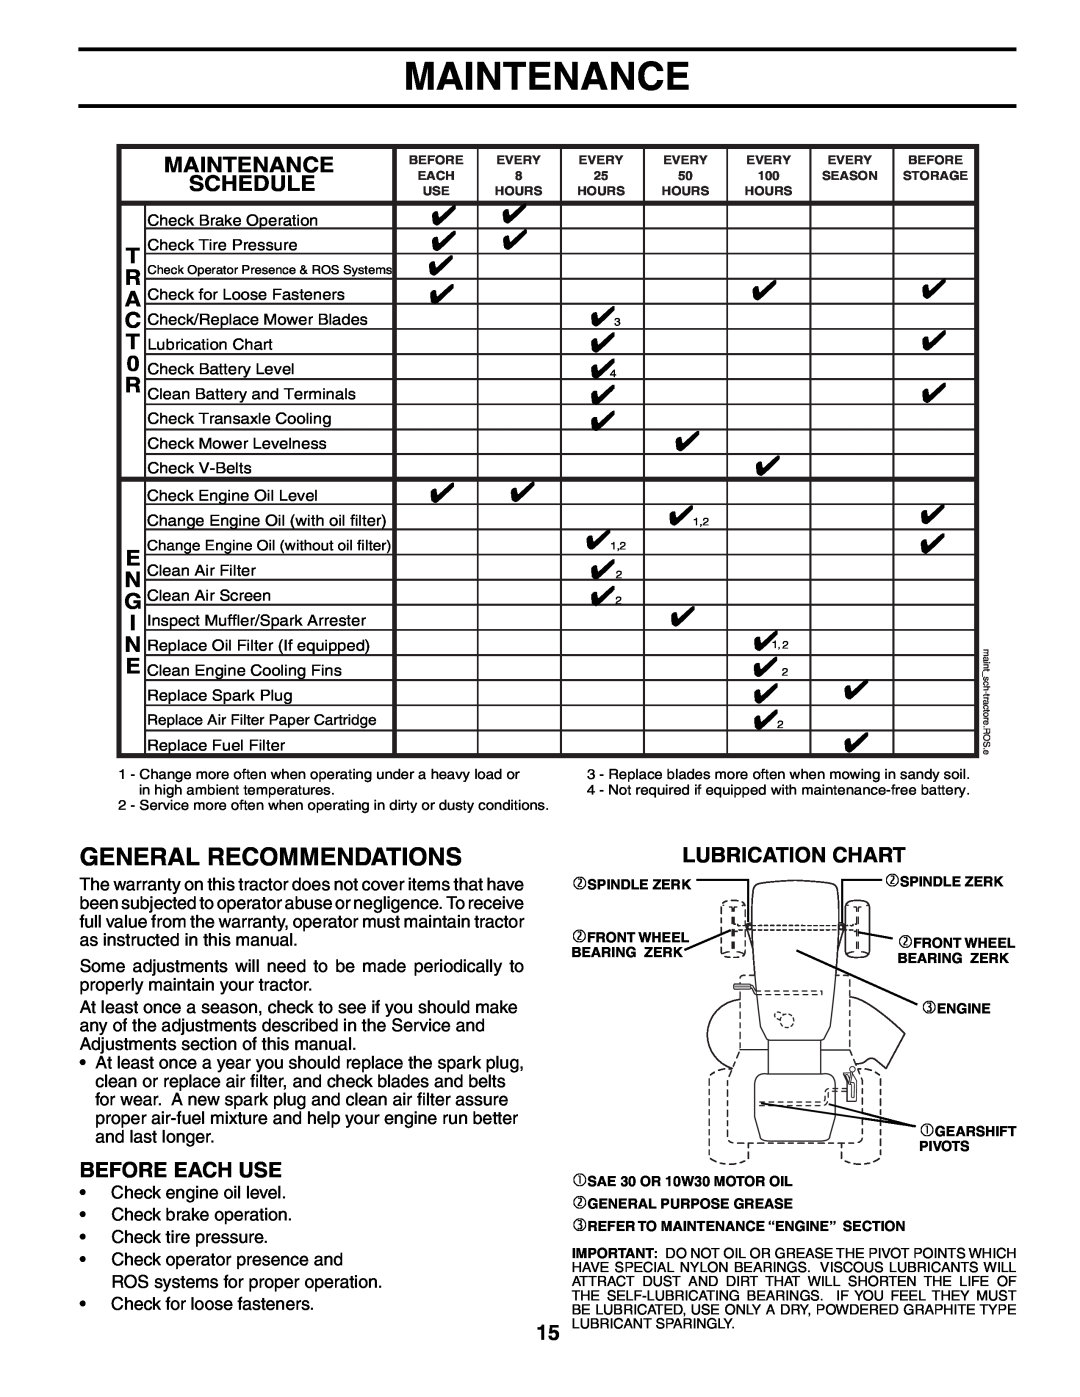 Poulan PB1638LT manual Maintenance, General Recommendations, Schedule, Before Each Use, Lubrication Chart 